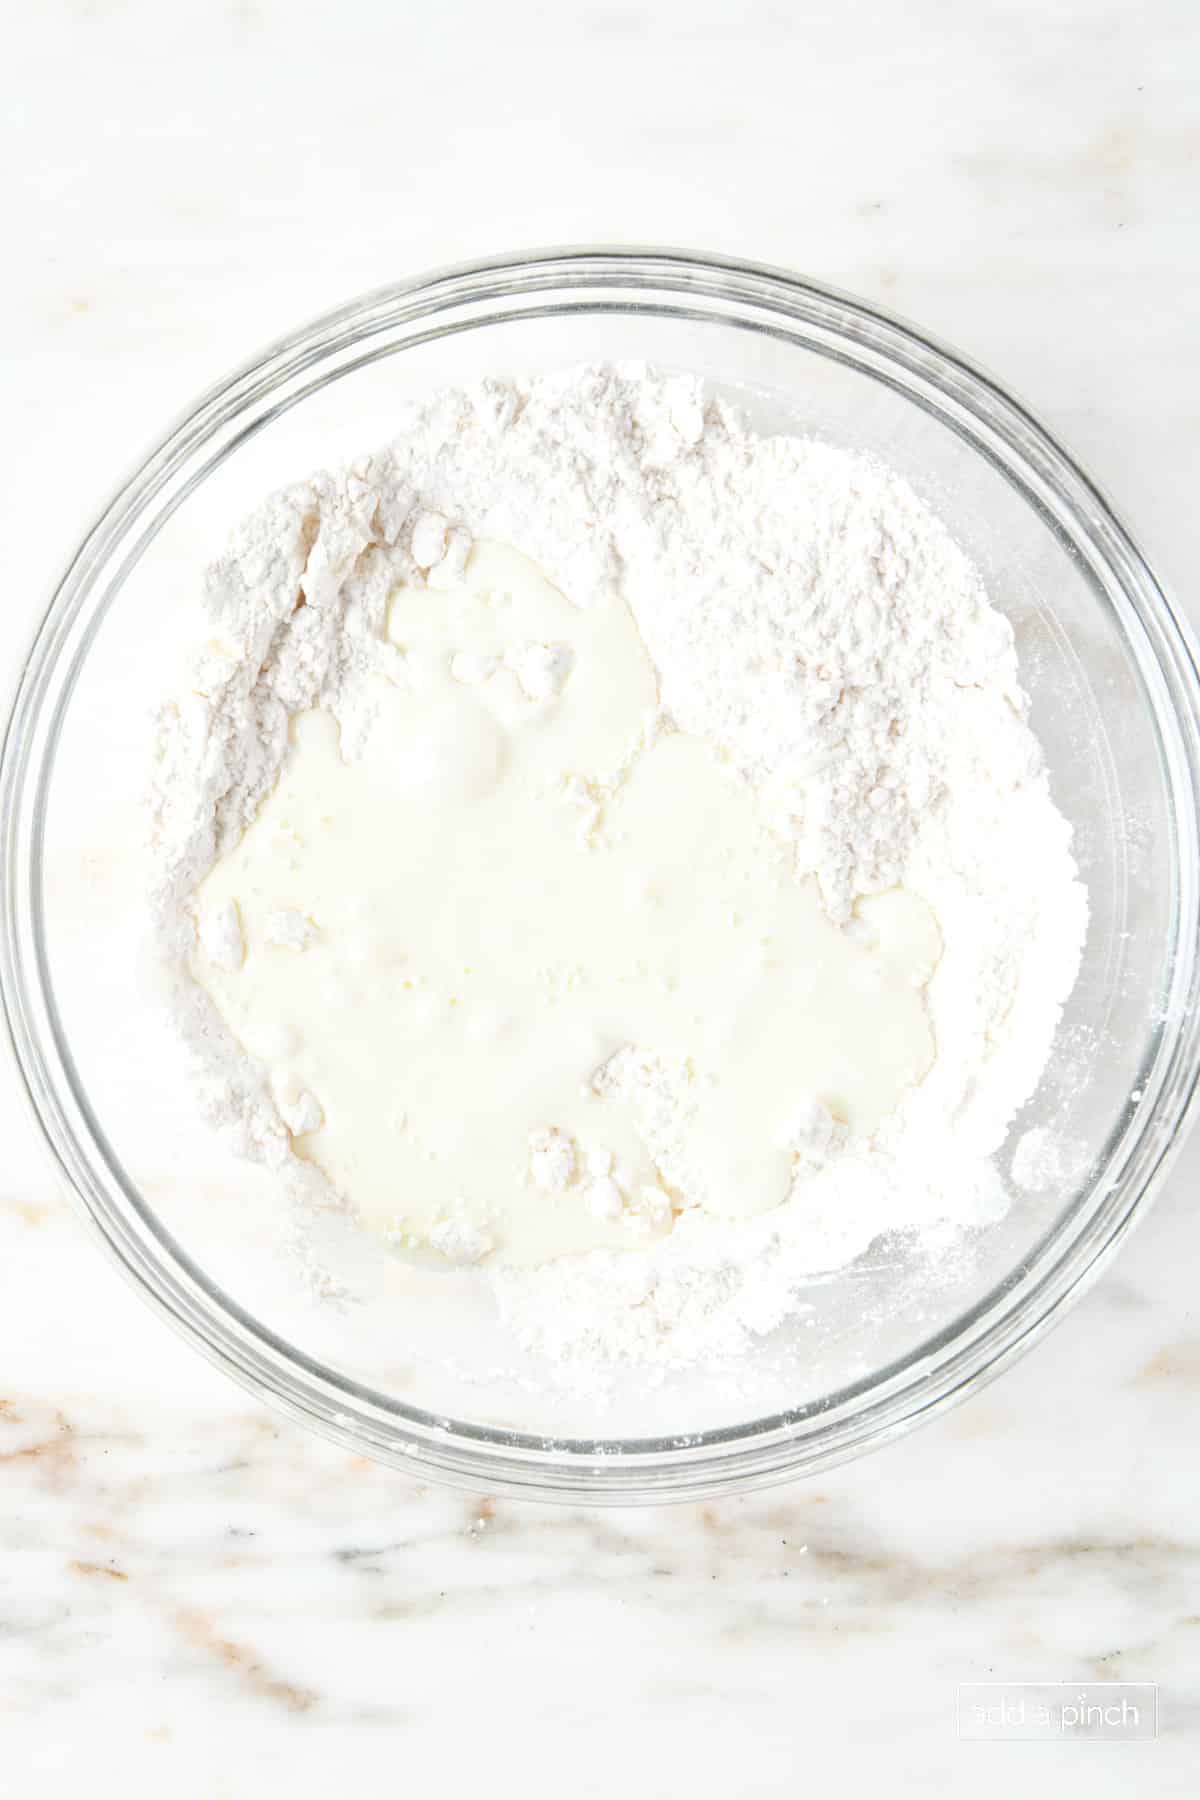 Buttermilk is added to flour in a glass bowl.